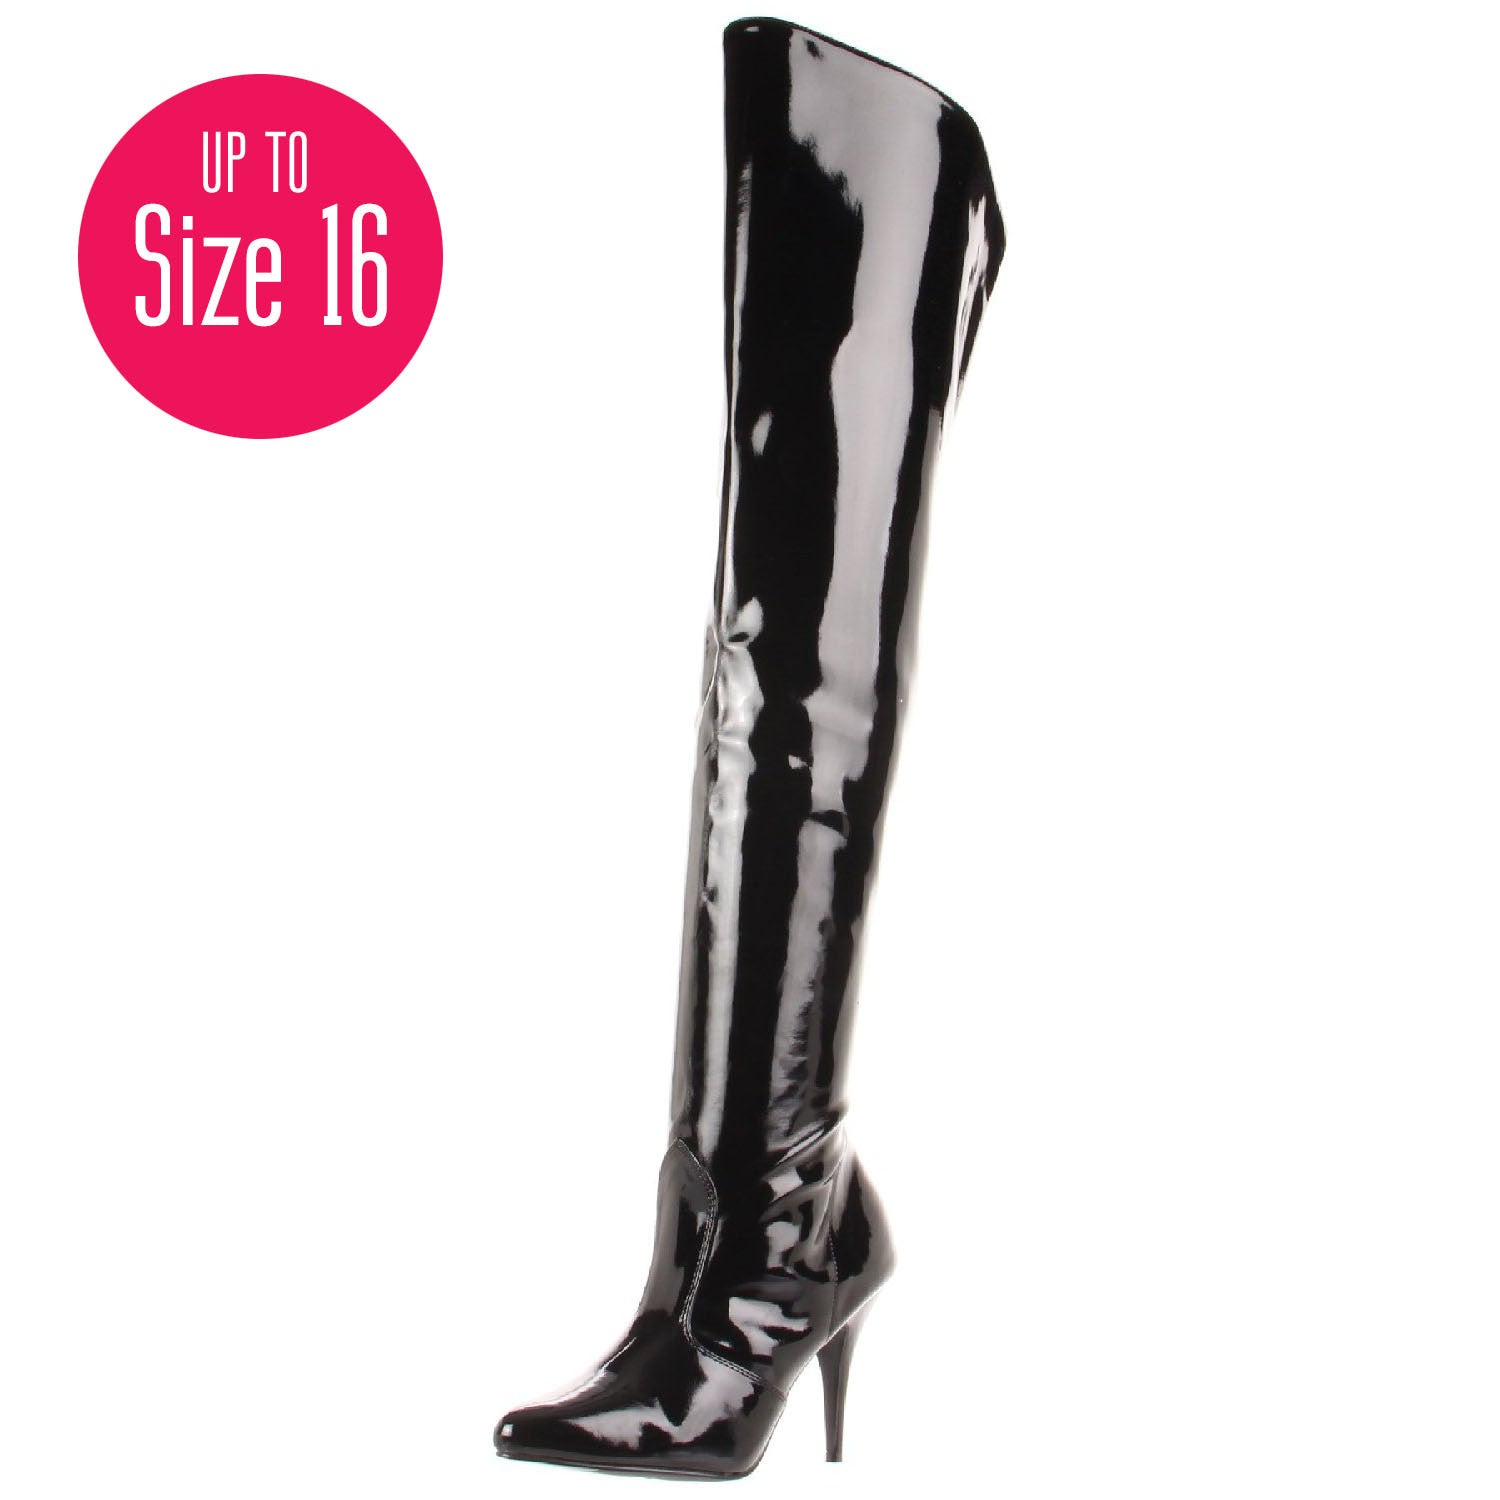 Pleaser VANITY-3010 Black Patent Thigh High Boots - Shoecup.com - 1